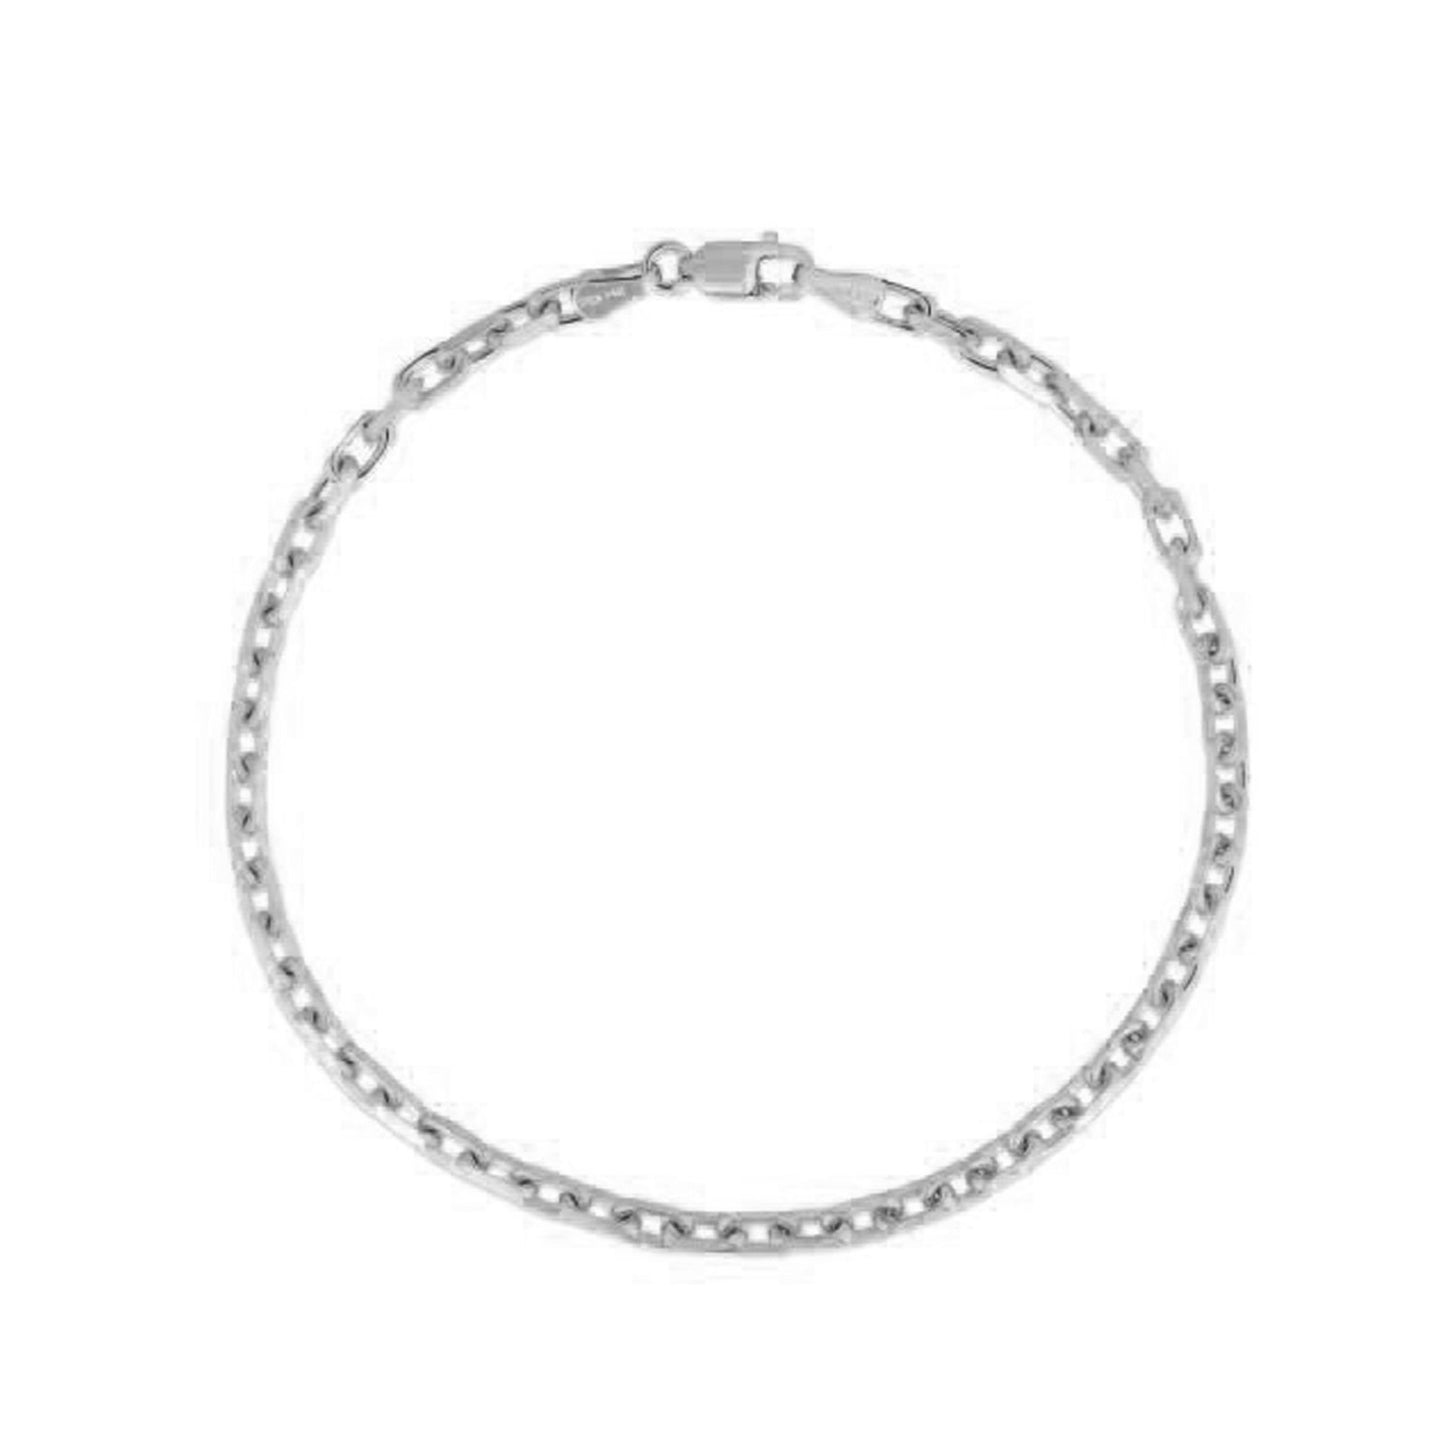 2.5mm 14k White Gold French Cable Chain Bracelet